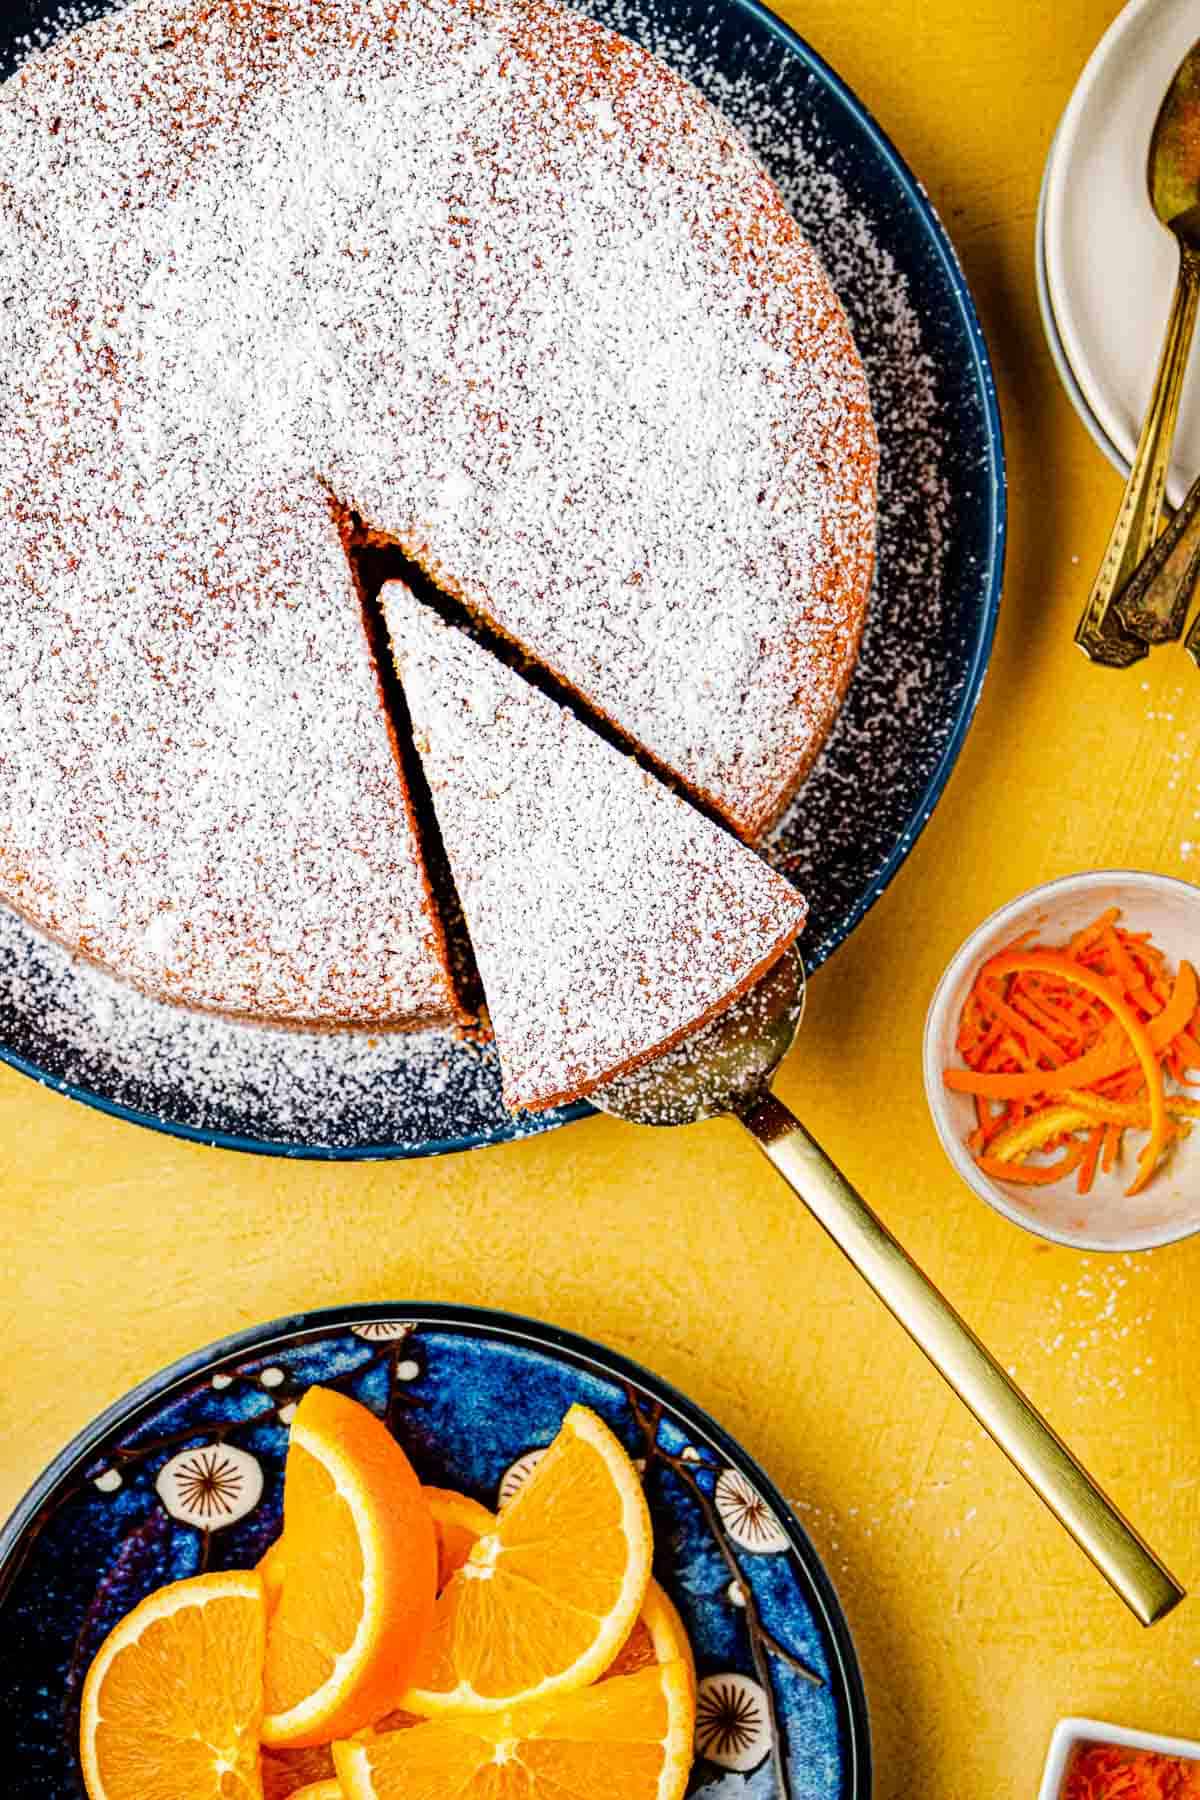 A slice being lifted from a baked Torta di Carote (Italian Carrot Cake) topped with powdered sugar on a plate.